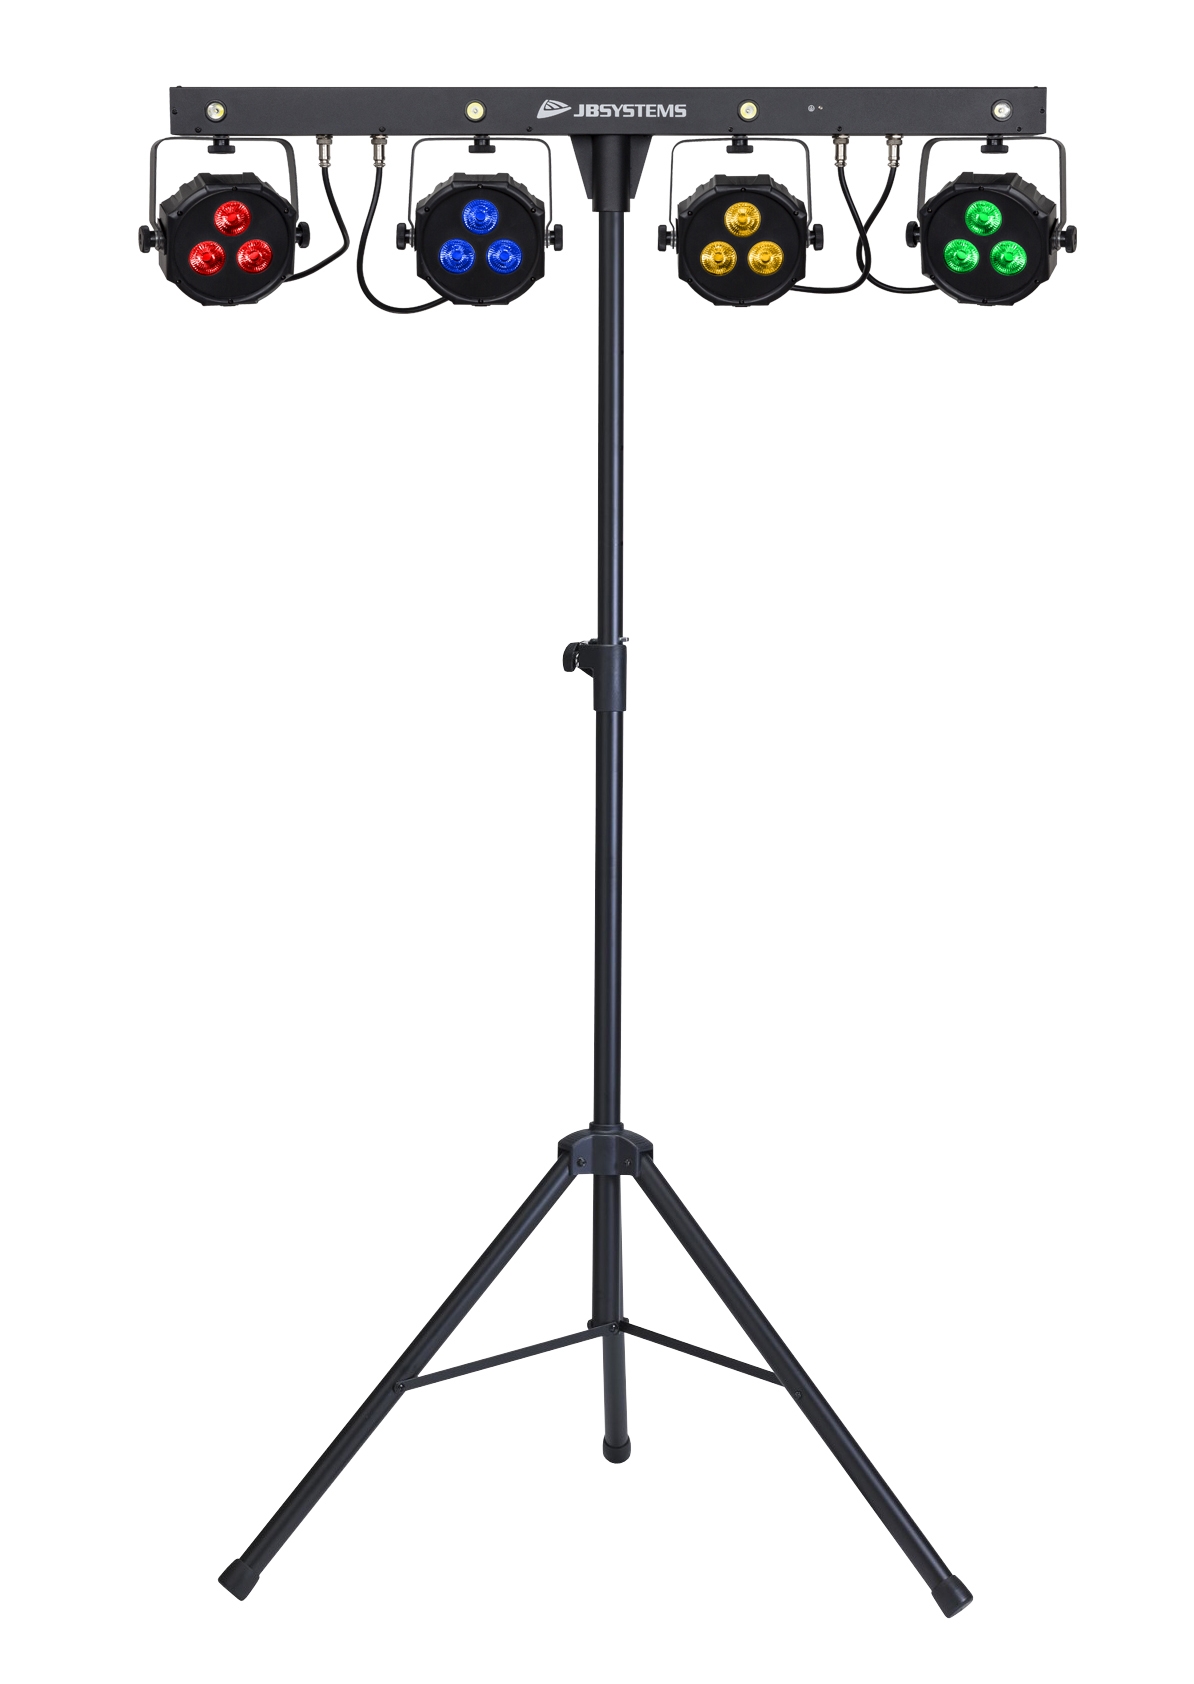 A complete ready to use light set for all your events and parties: a compact powered 4BAR, wireless foot controller, light stand and carrying bags <p hidden>party</p>